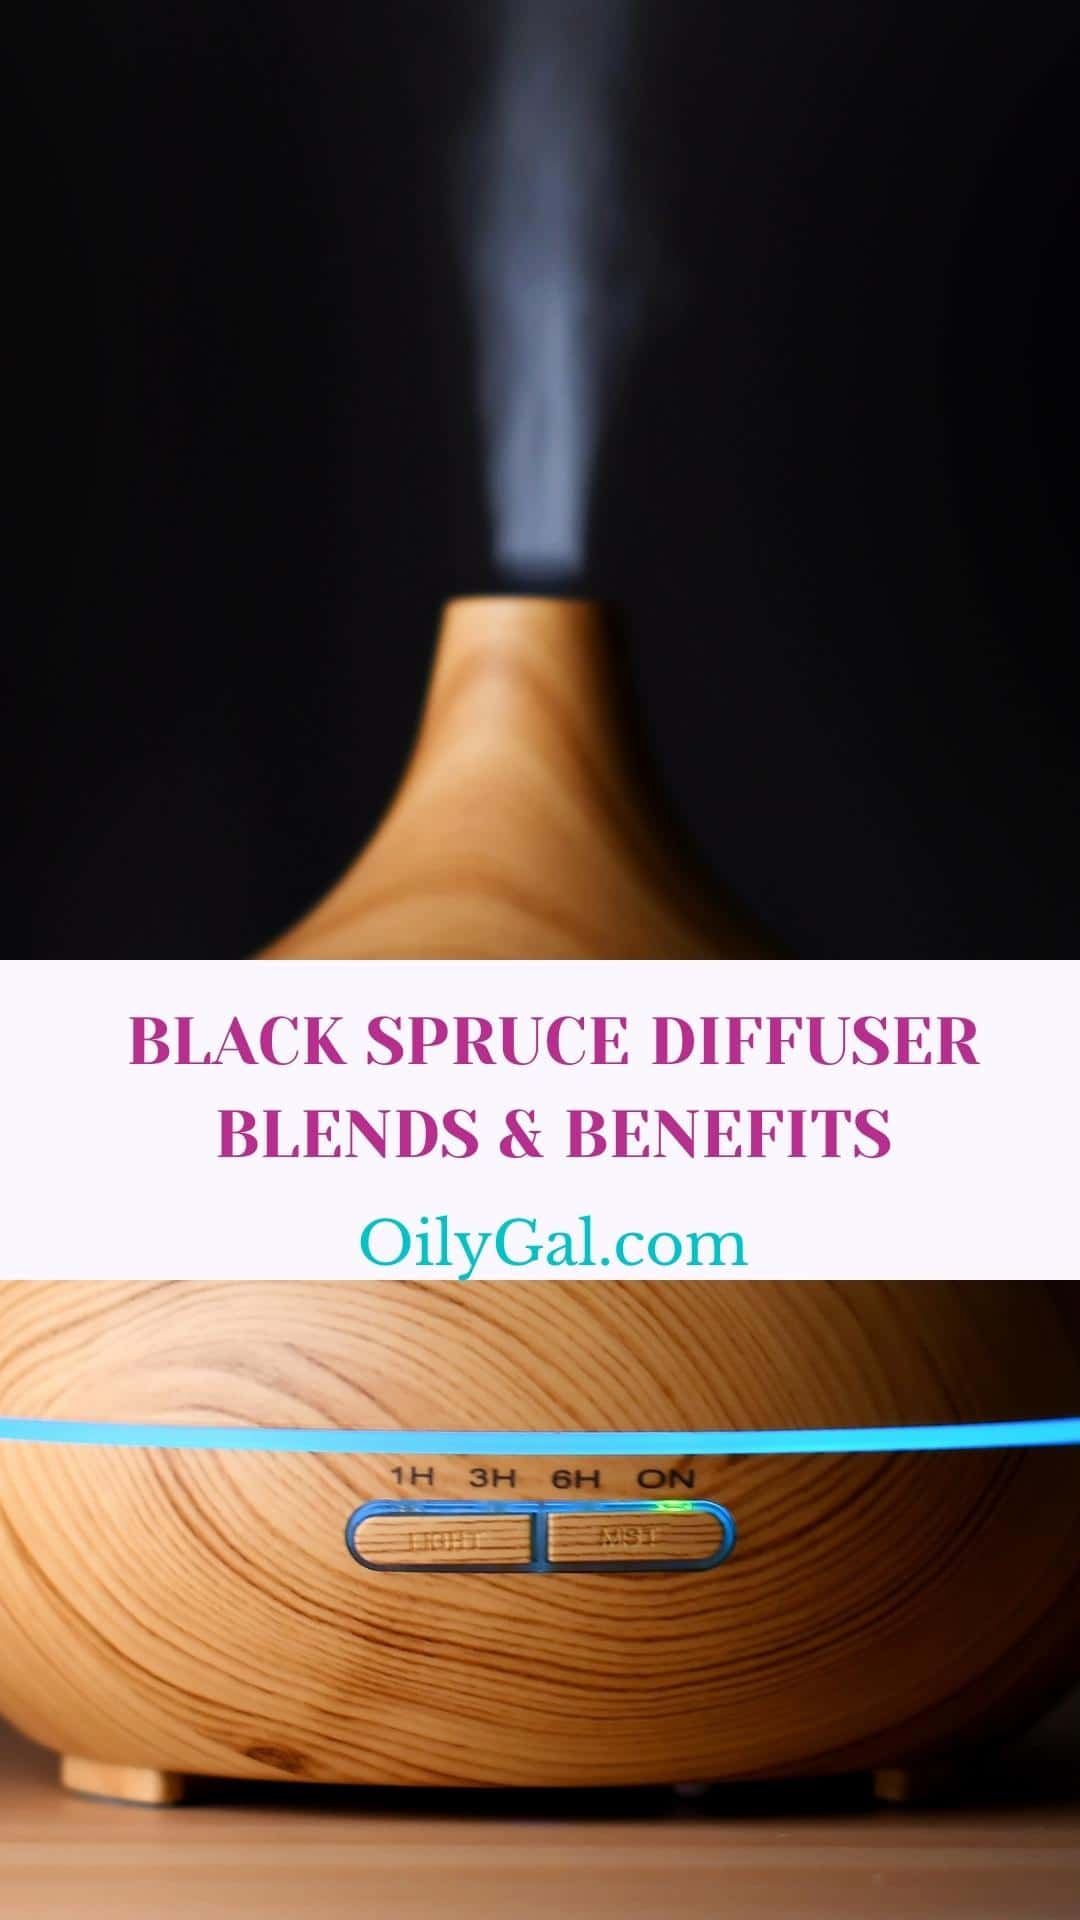 Black Spruce Diffuser Blends and Benefits